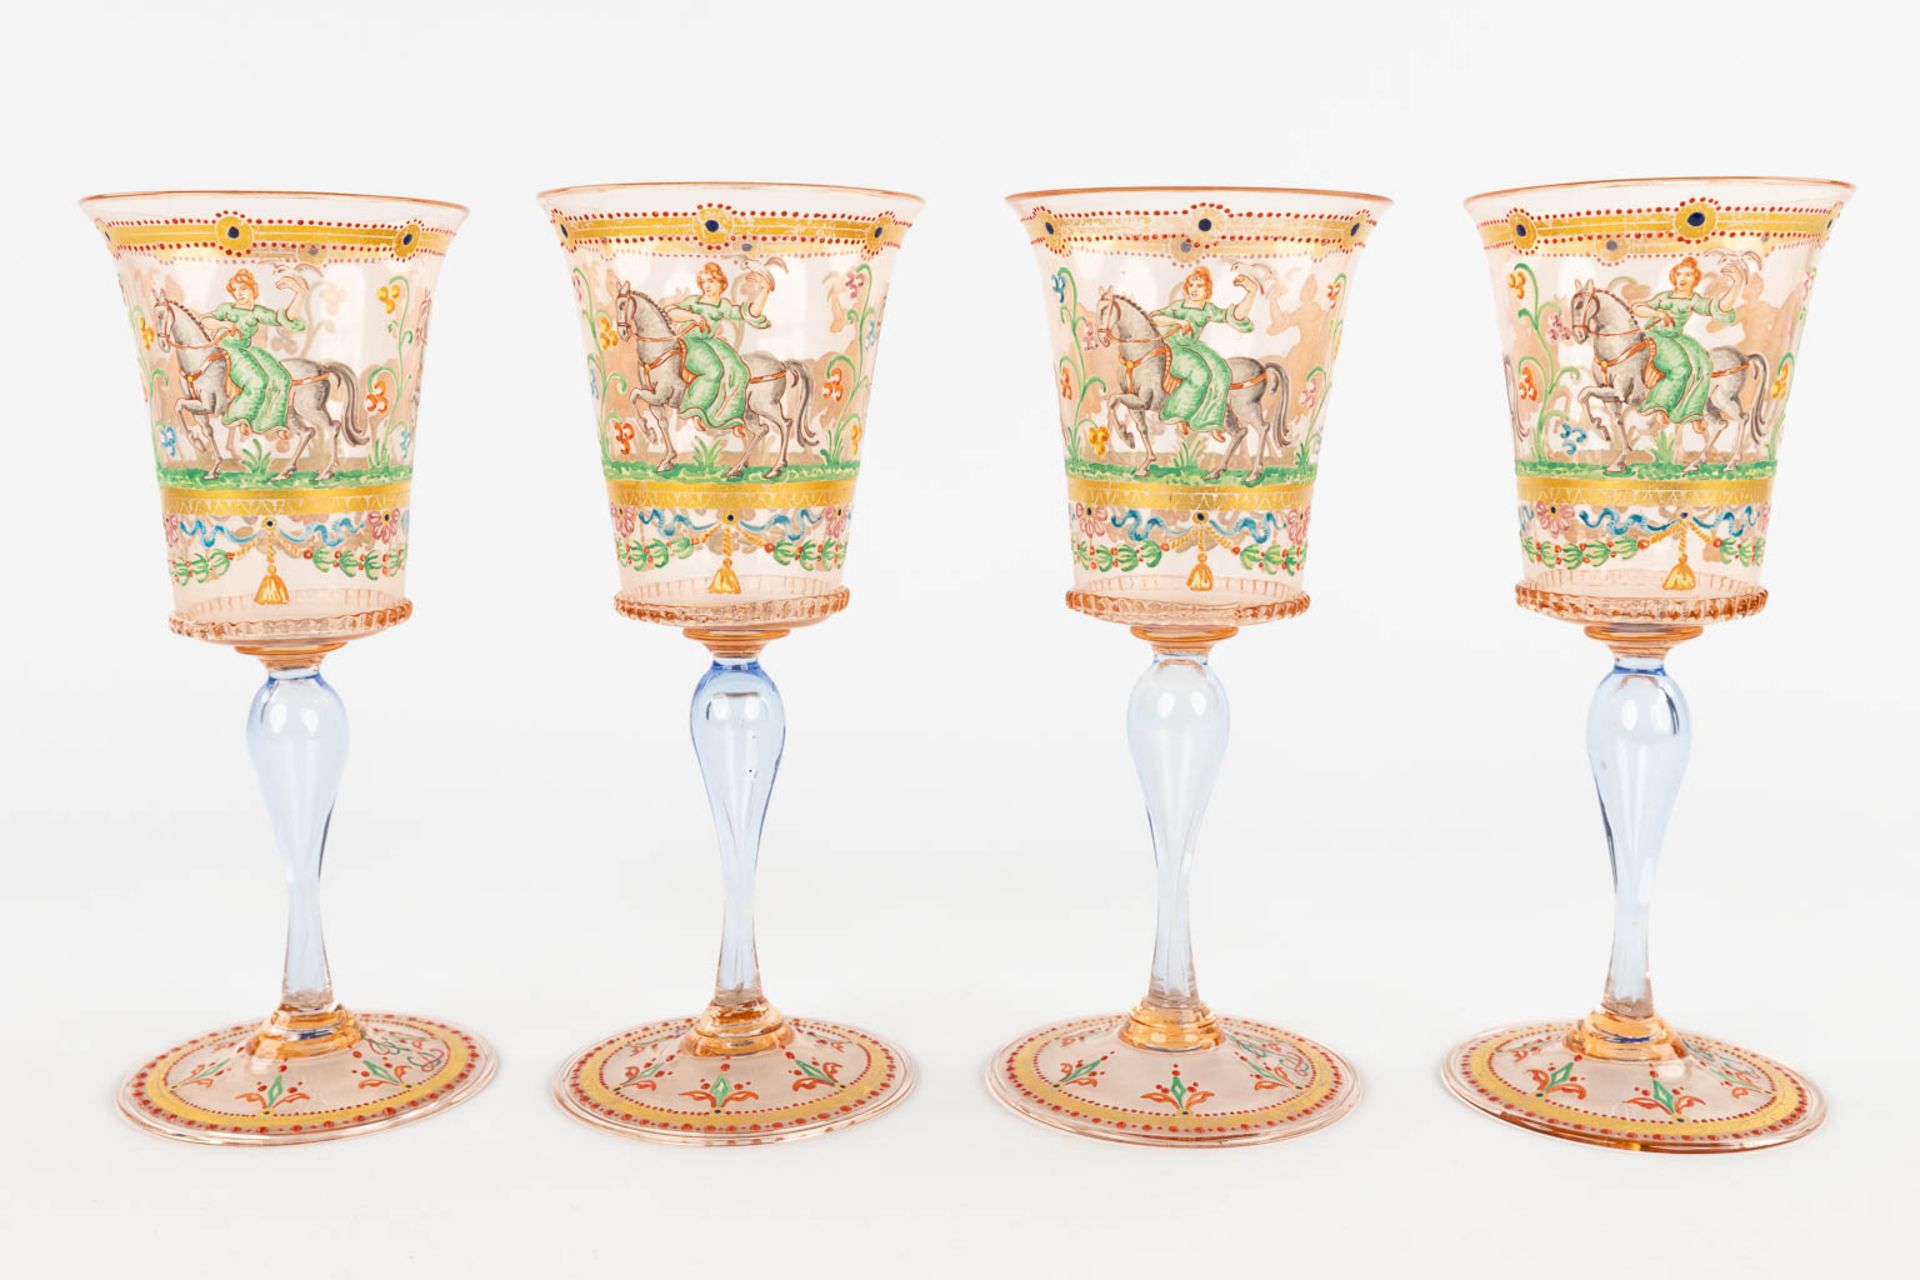 A set of 4 hand-painted and antique goblets, Murano, Salviati, 19th C. (H:17 x D:7 cm) - Image 6 of 16